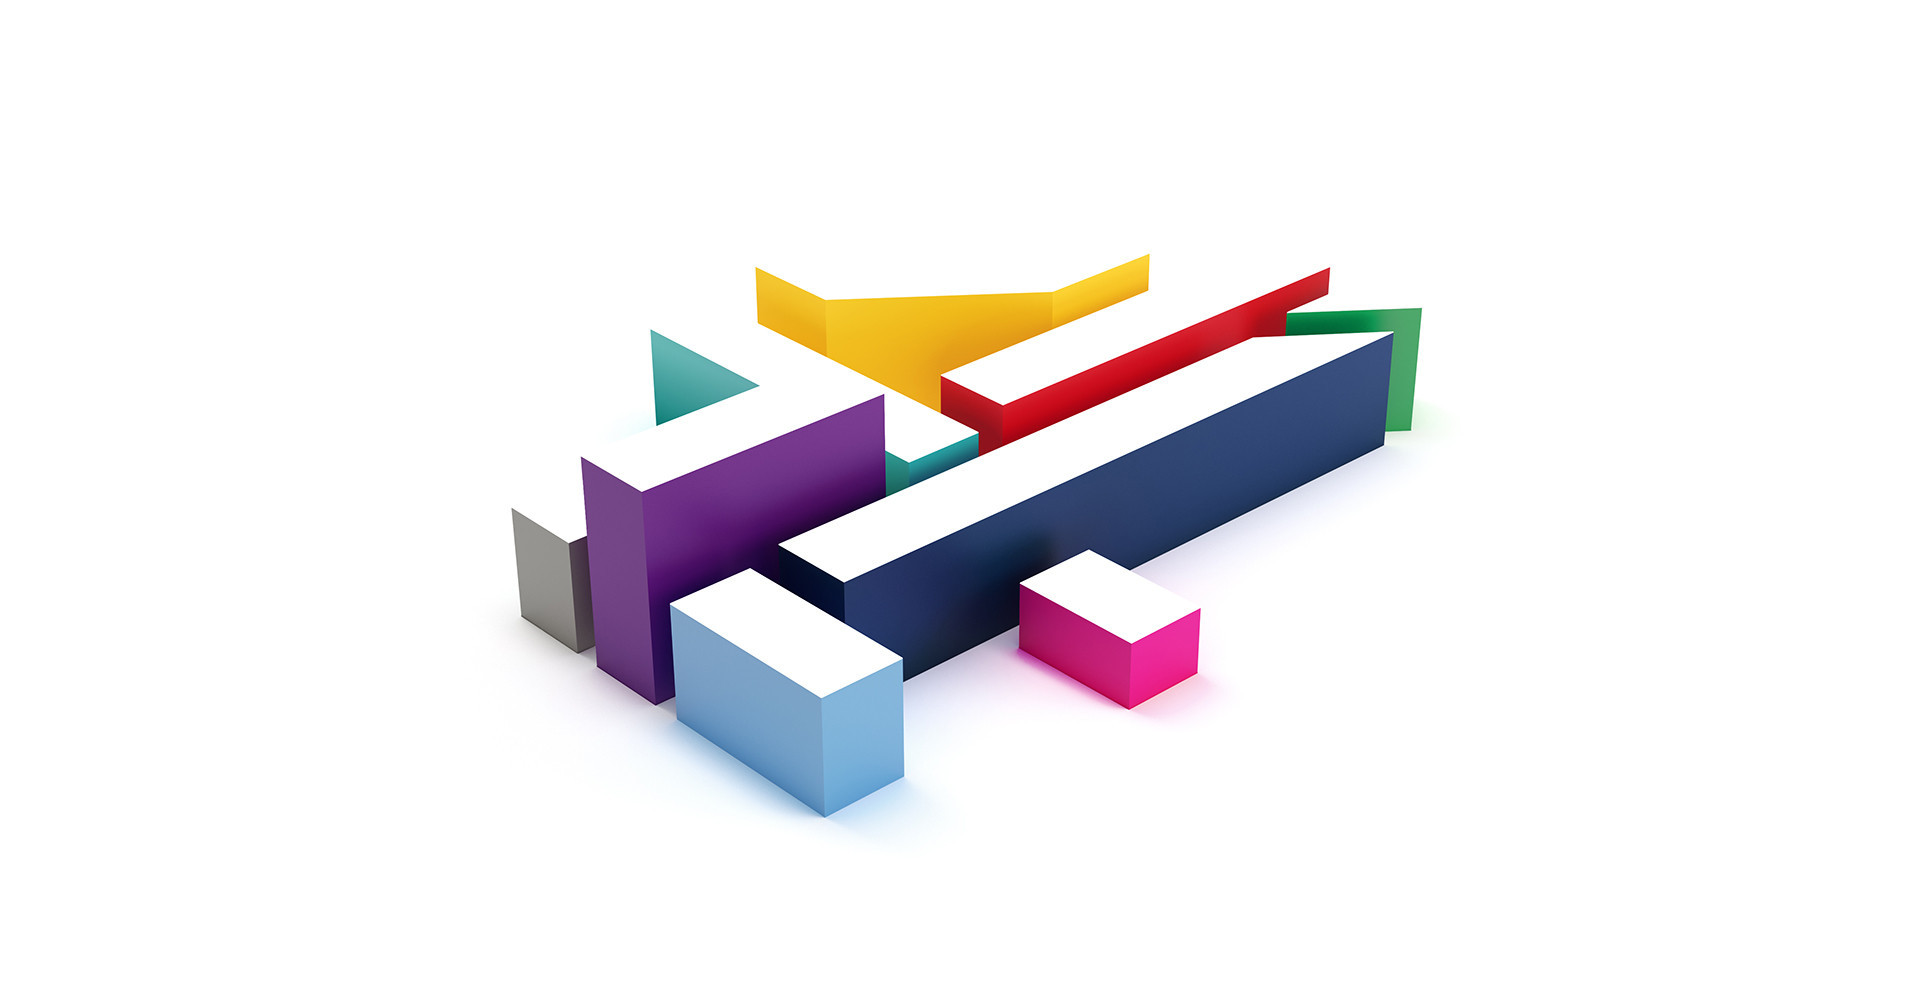 Channel 4 to broadcast 100 hours of Paralympics from Pyeongchang 2018 